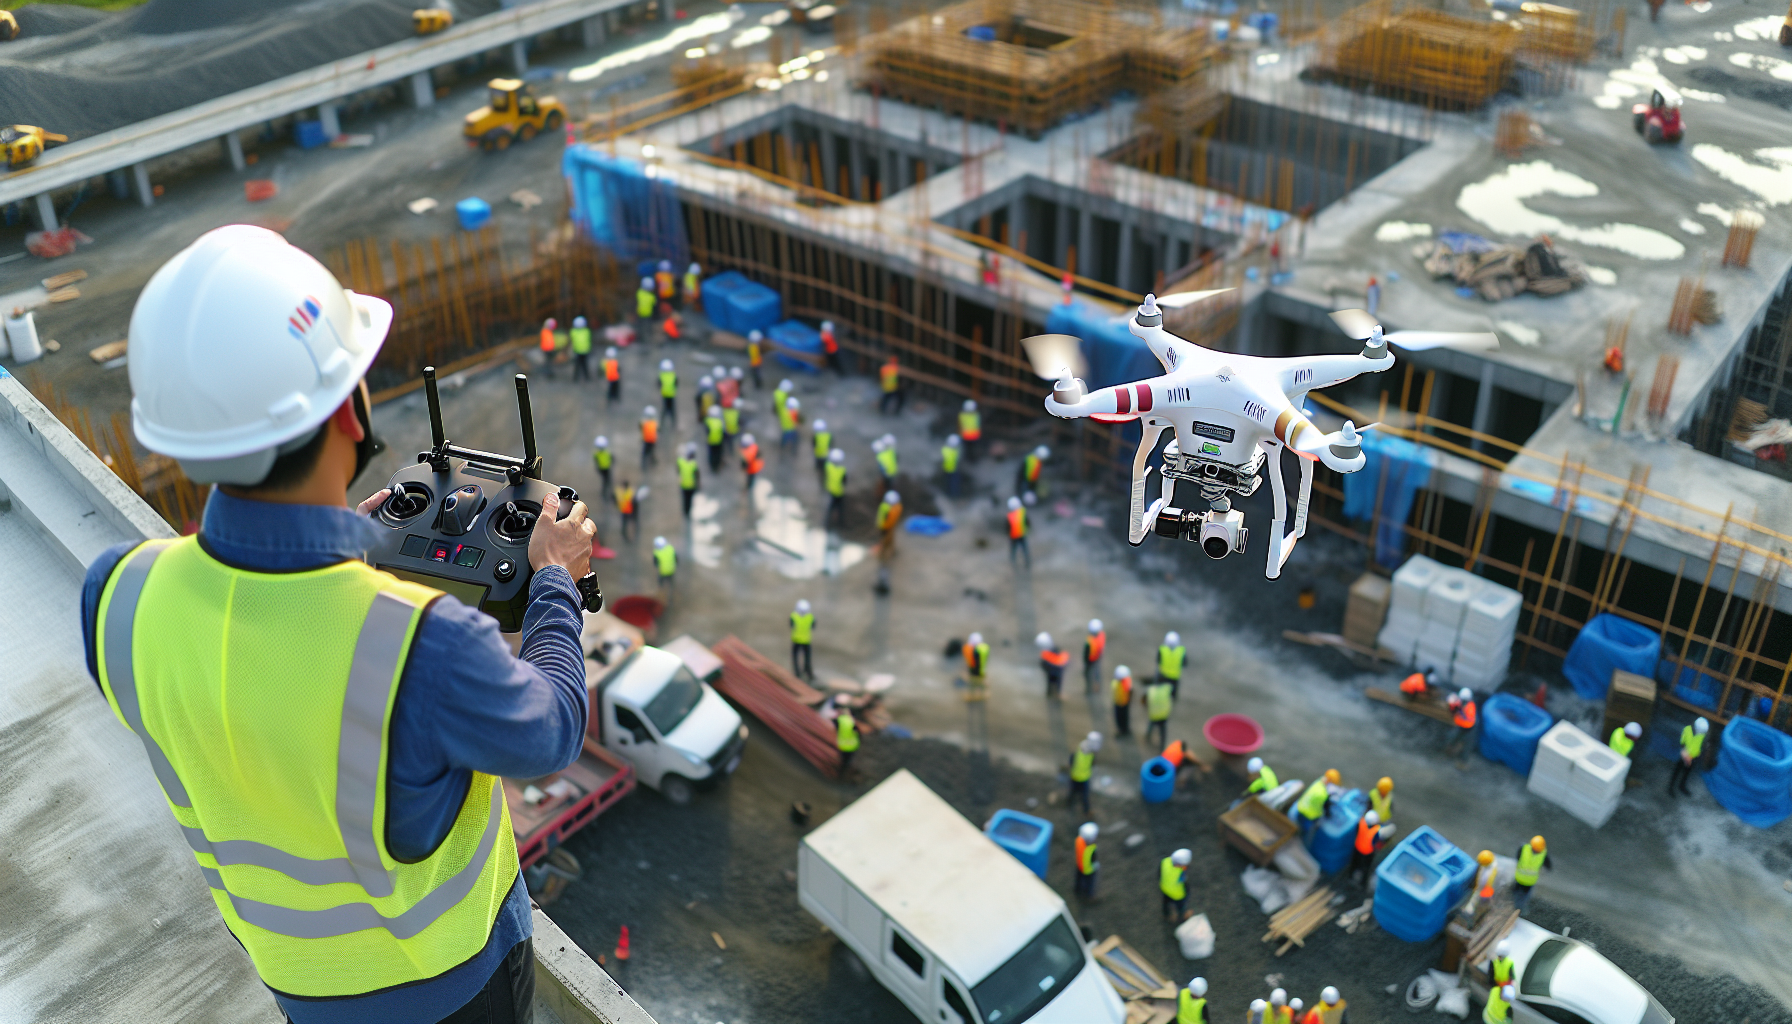 Drone capturing aerial images of a construction site for surveying and mapping